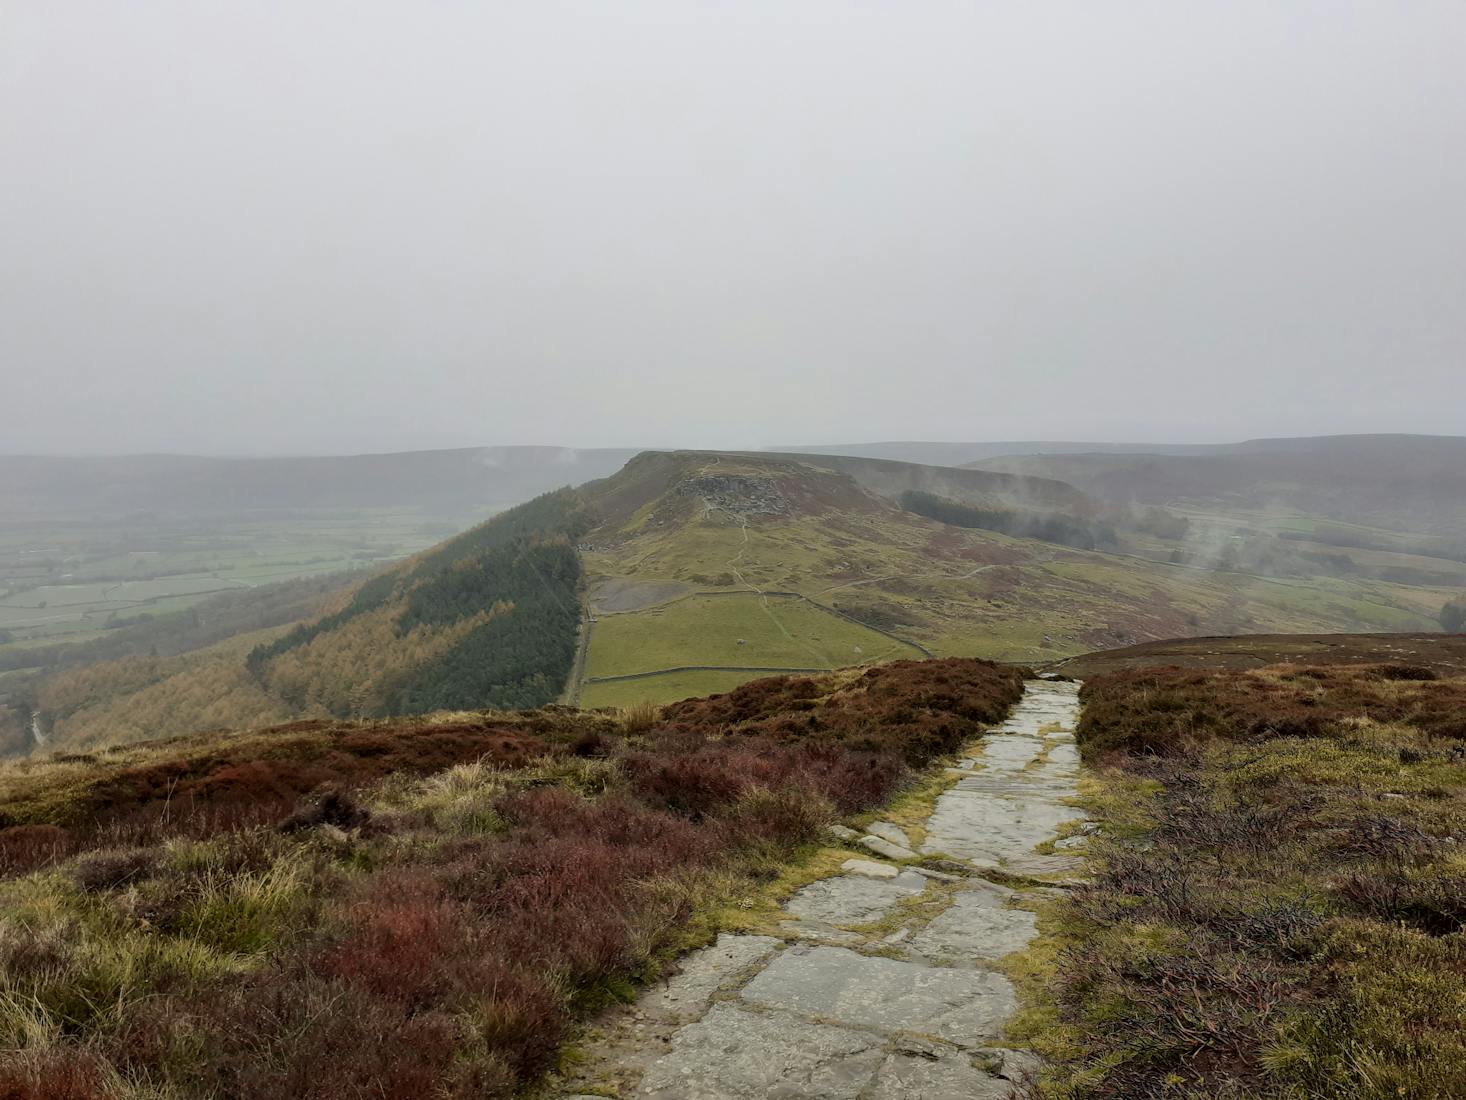 Day trips to North York Moors National Park